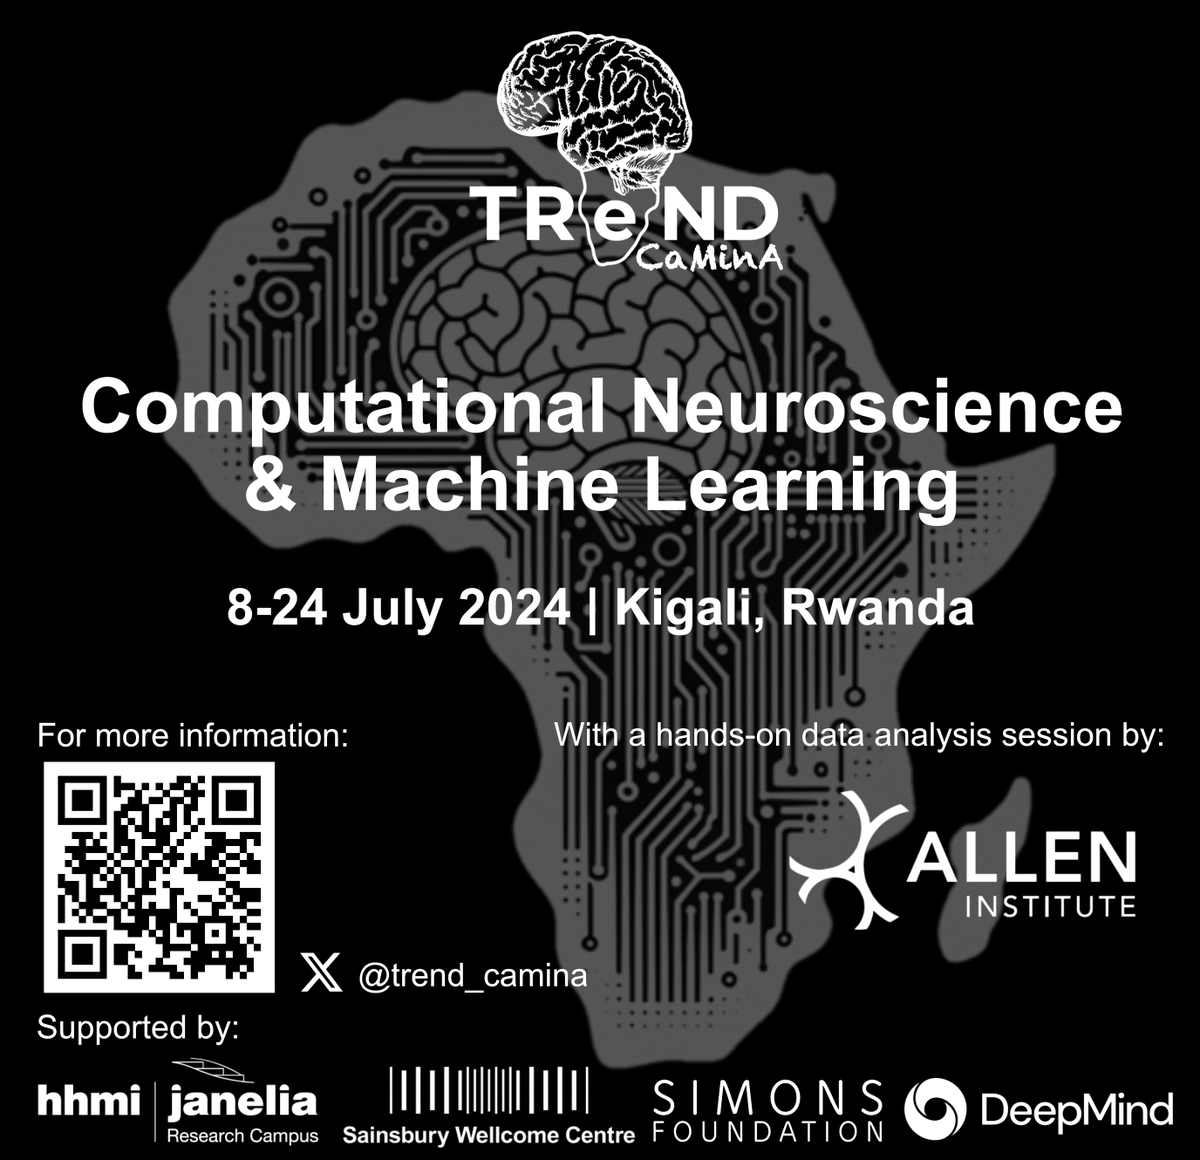 🚨Awesome news alert🚨 Our Computational Neuroscience & Machine Learning Course is back!! When: 8-24th July 2024 Where: CMU-Africa campus, Kigali, Rwanda Applications open: 15th January 2024 Applications close: 15th February 2024 For news on the course follow @trend_camina